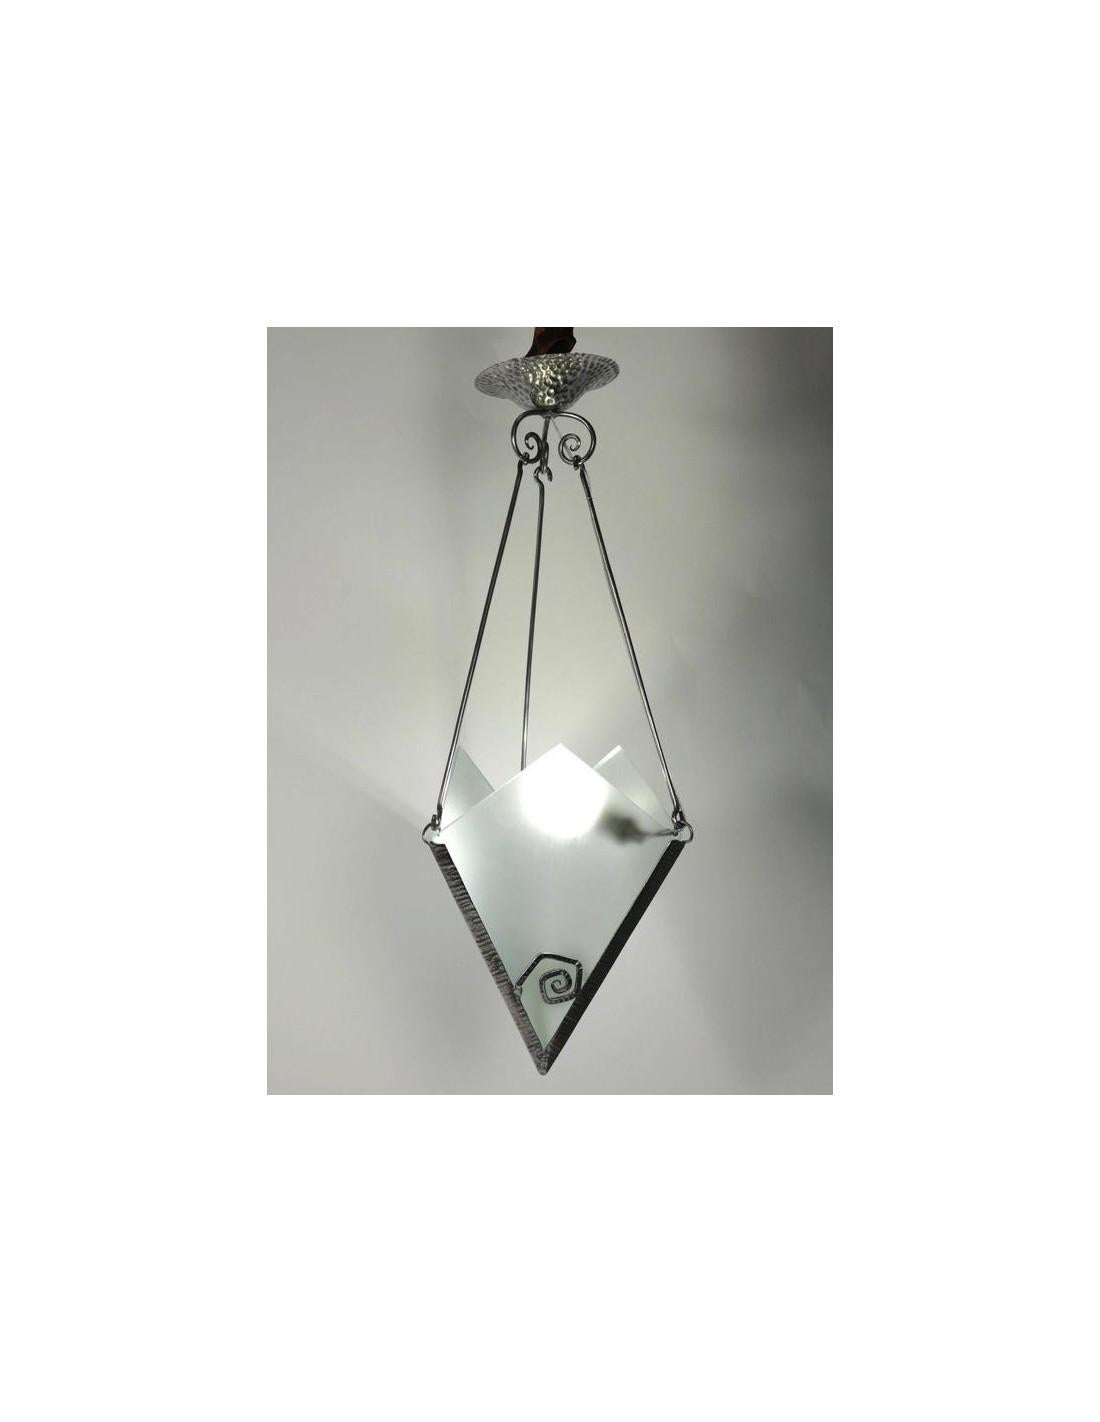 Metal Pretty Small Art Deco Light Fixture in Etched Glass and Steel, circa 1930 For Sale